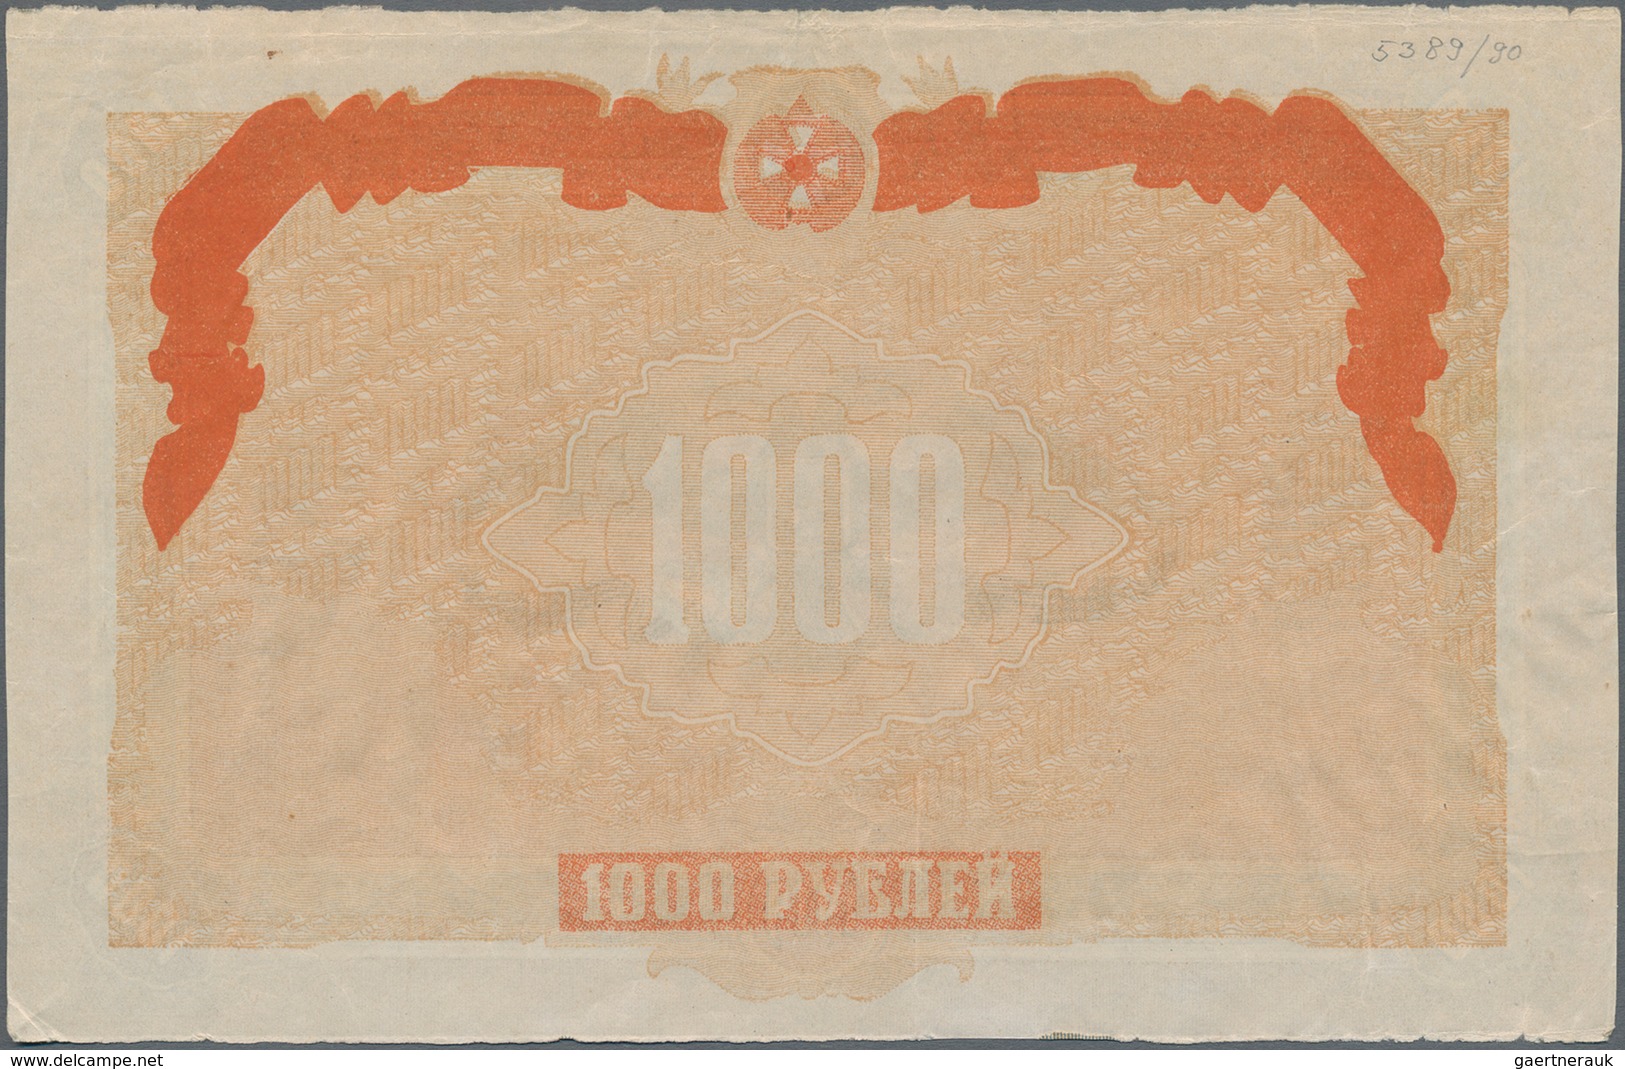 Russia / Russland: South Russia 1000 Rubles 1919, Unfinished Front Only With Underprint Colors And T - Russia